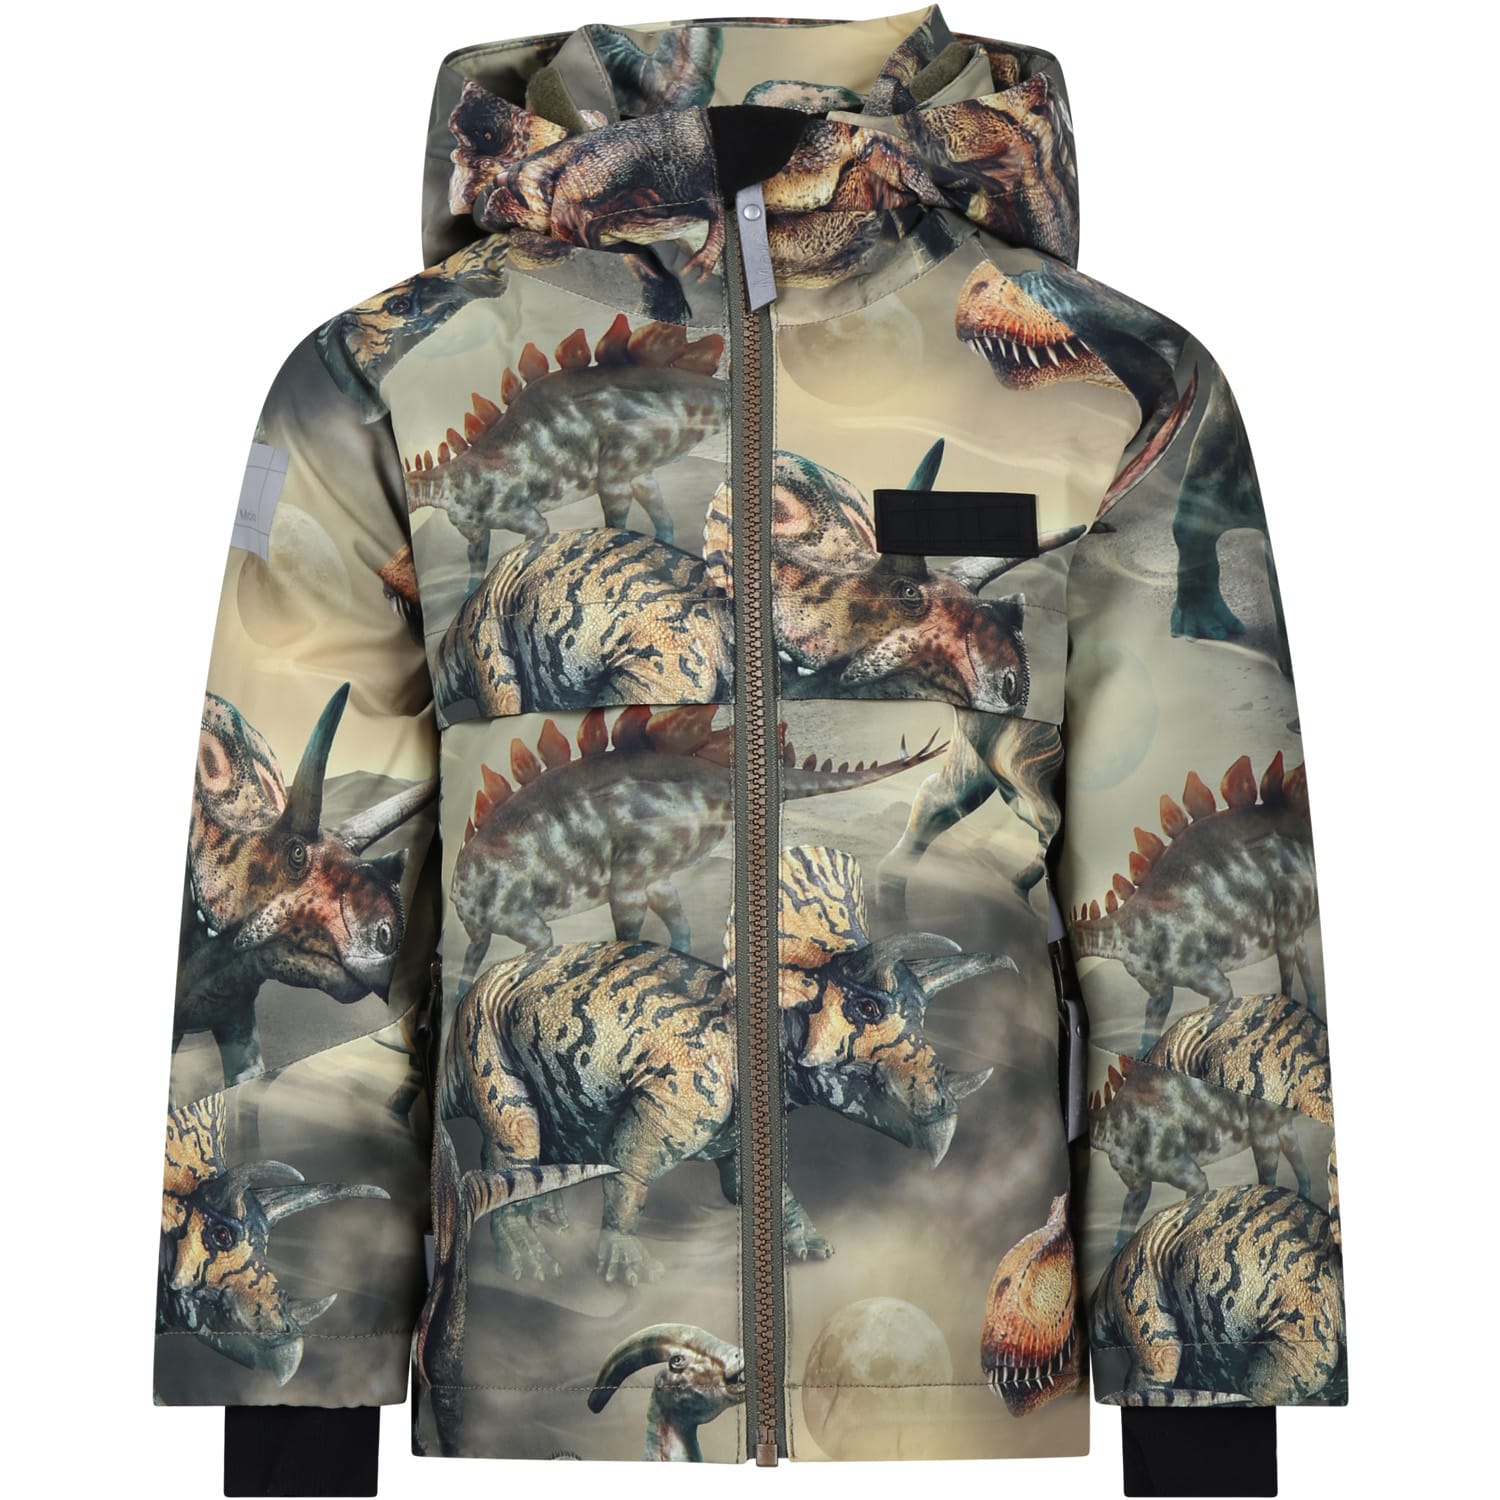 Molo Kids' Multicolor Down Jacket For Boy With Print And Logo